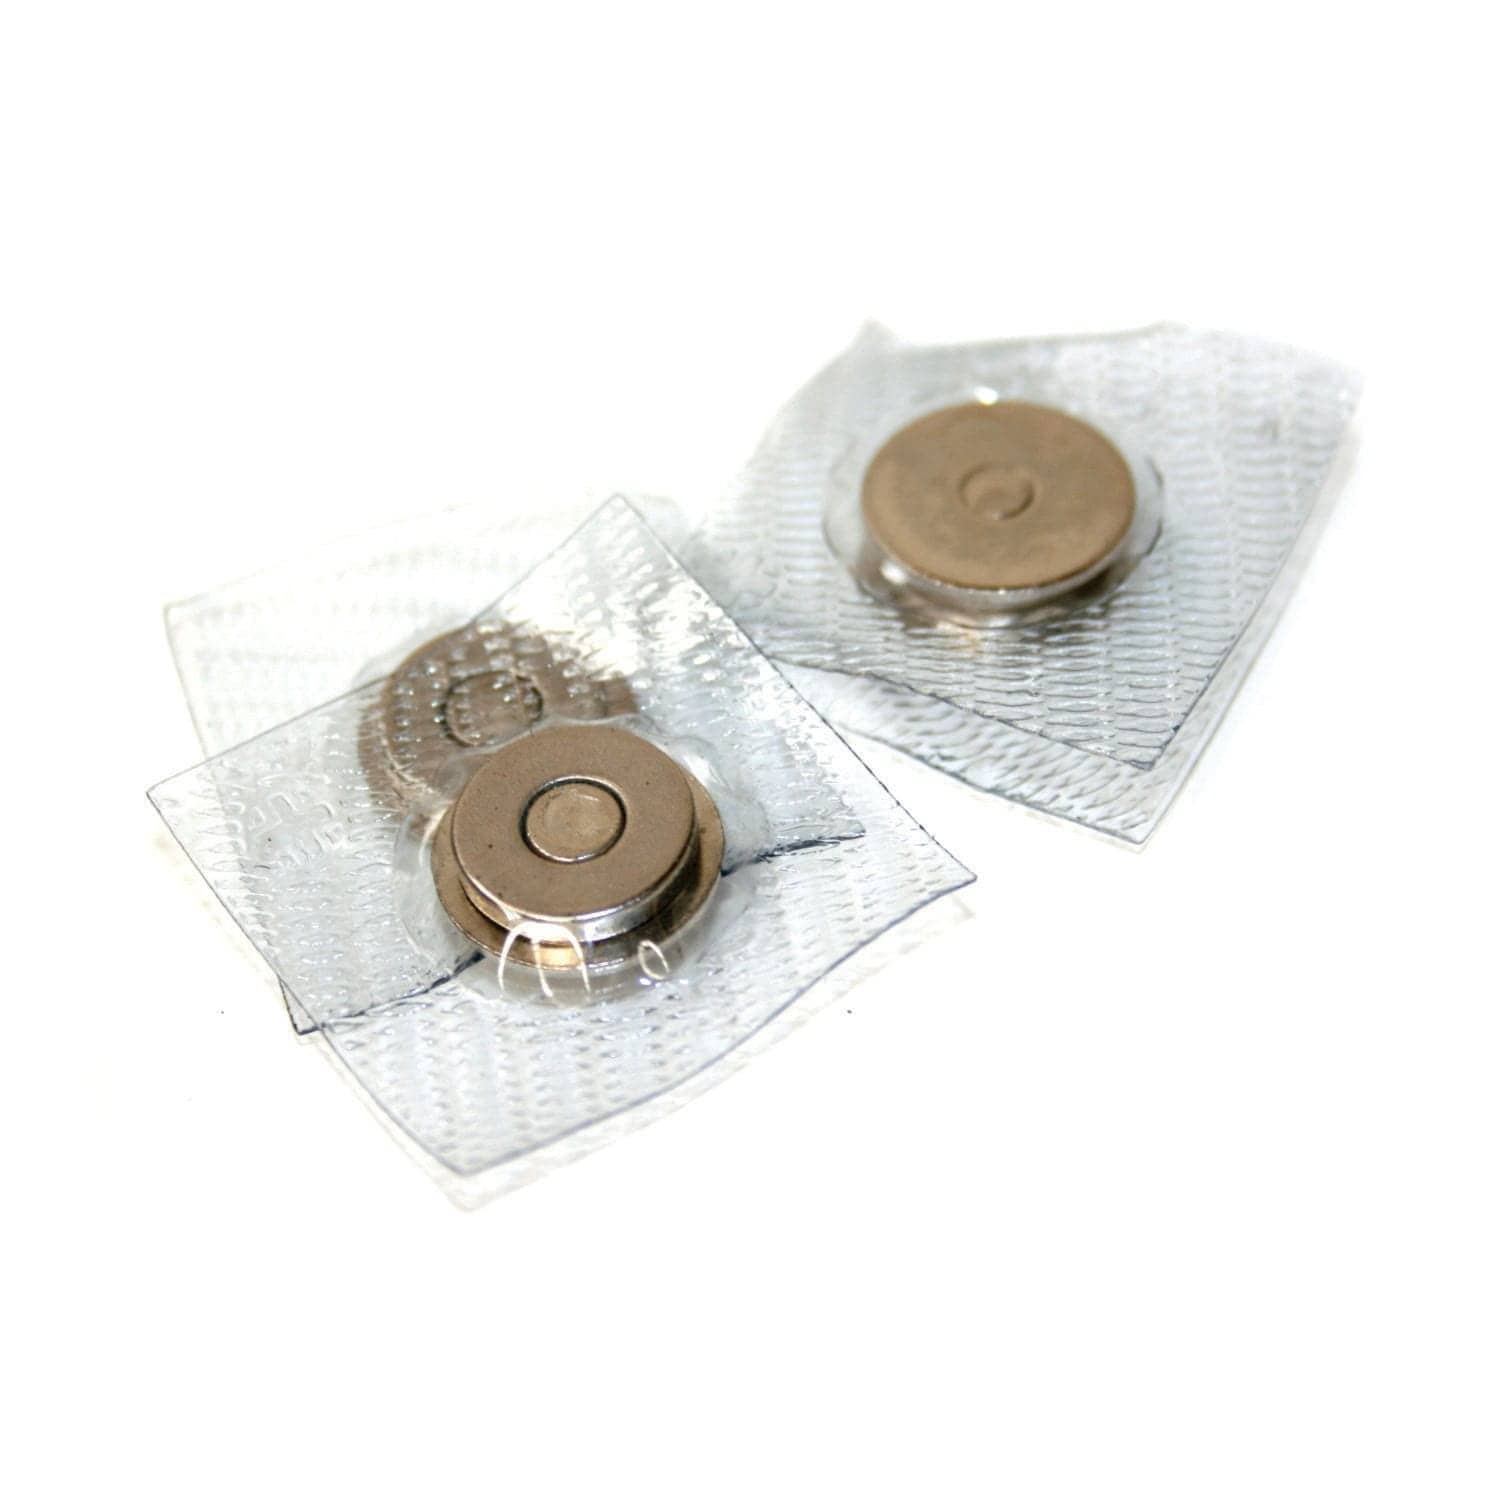 New! 6 Magnetic Button Clasp Snaps - Purses, Bags, Clothes - No Tools  Required - Choose Small or Large Magnetic button size: 14mm